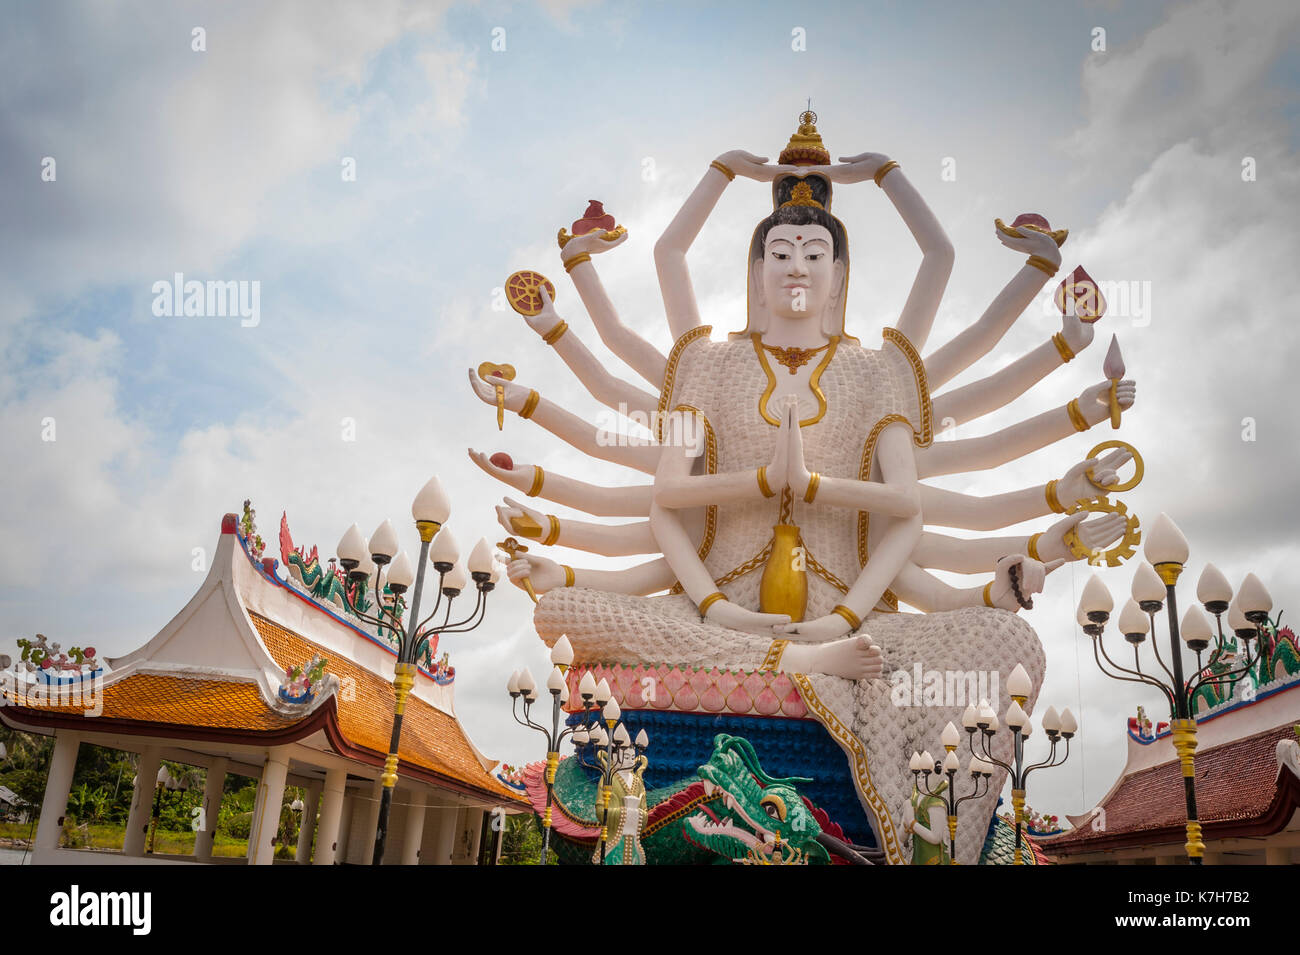 Guanyin, a the goddess of mercy and compassion at Wat Plai Leam, a Buddhist temple on the island of Ko Samui, Thailand. Stock Photo